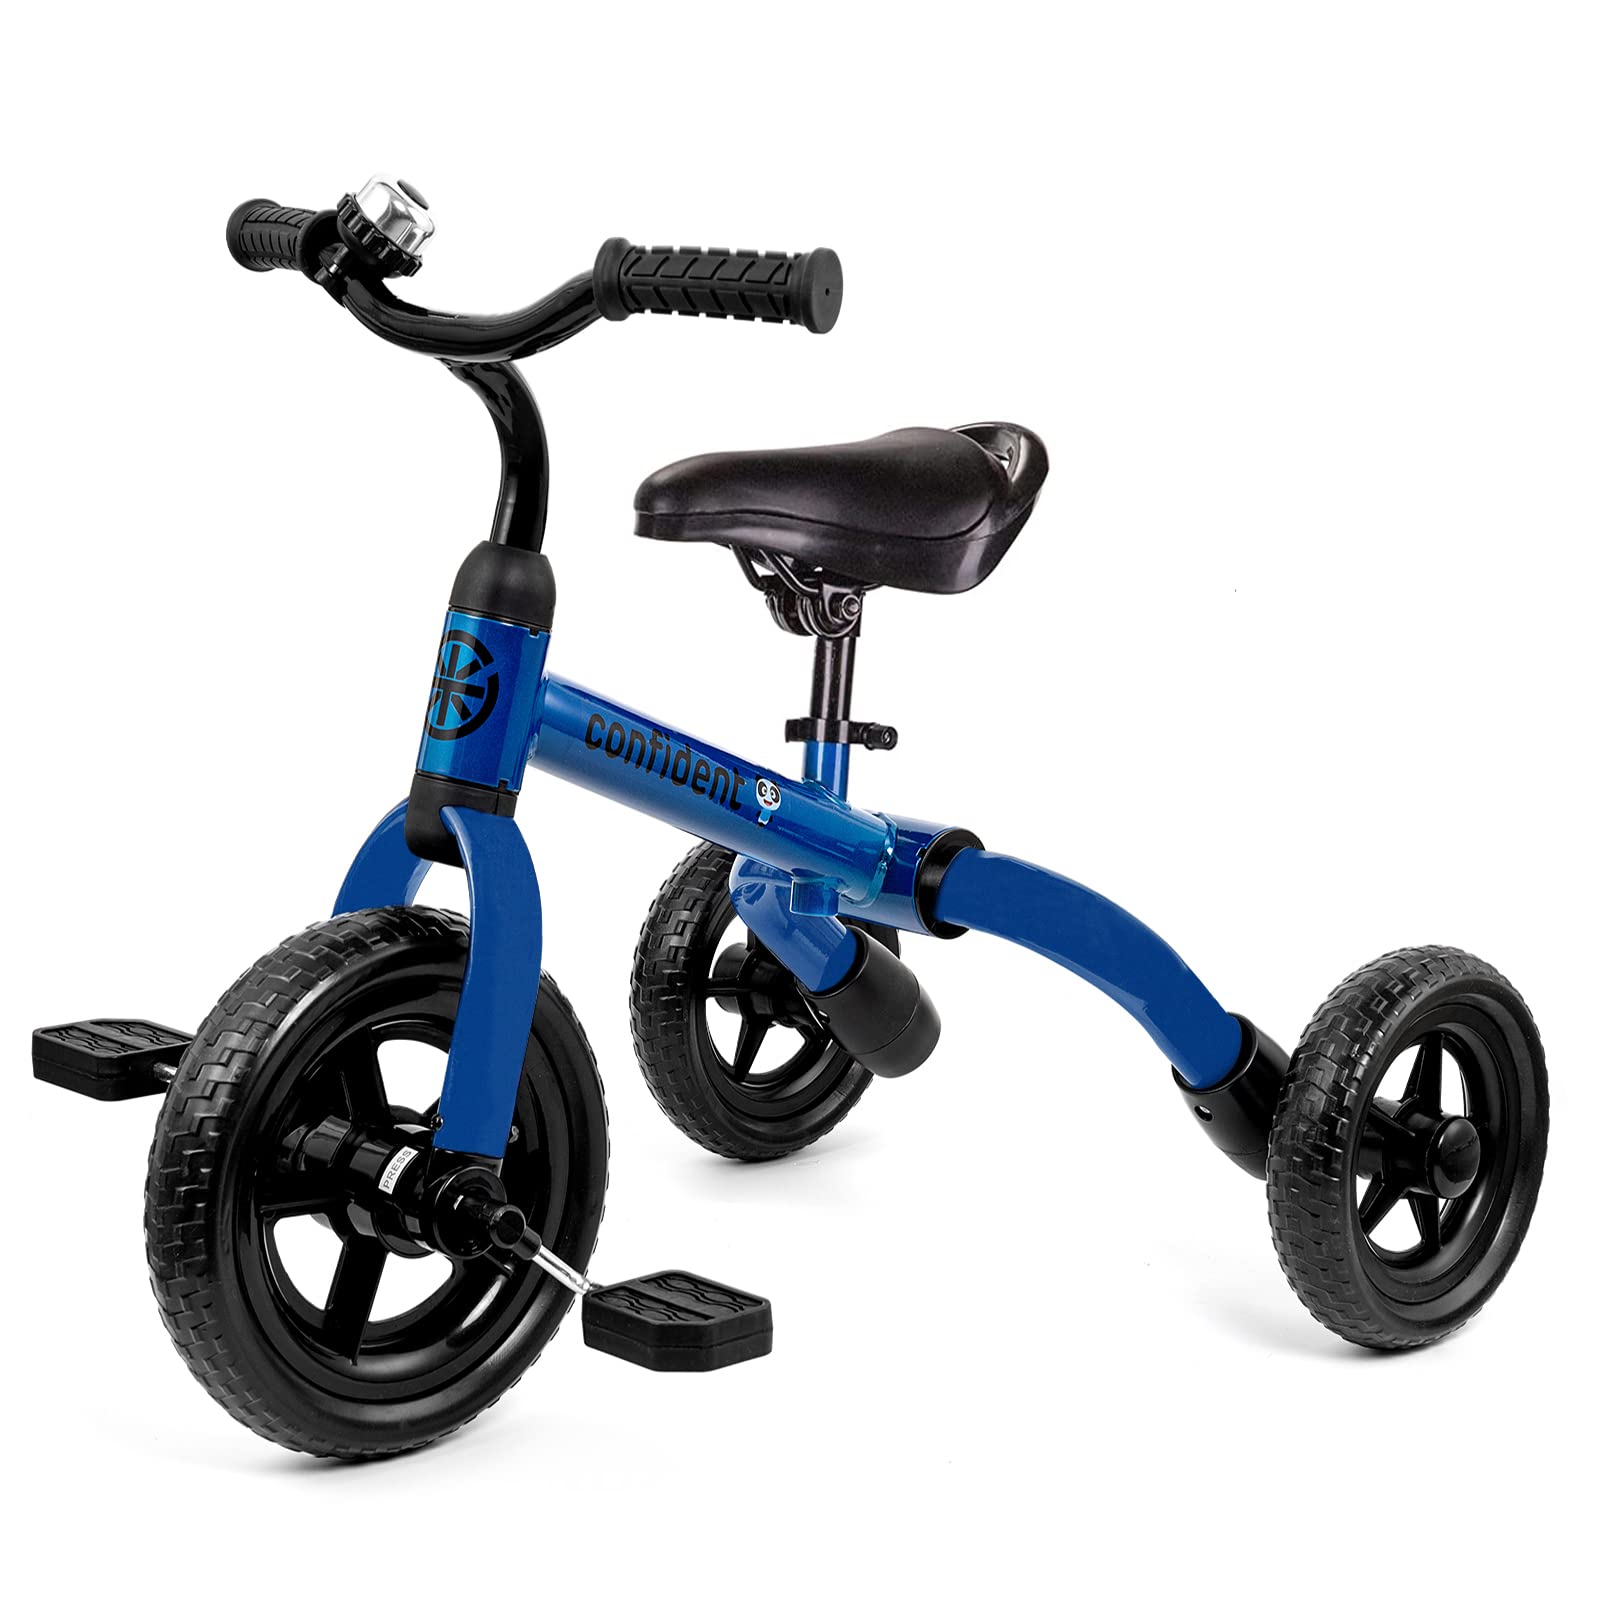 Ancaixin 3 in 1 Toddler Tricycle